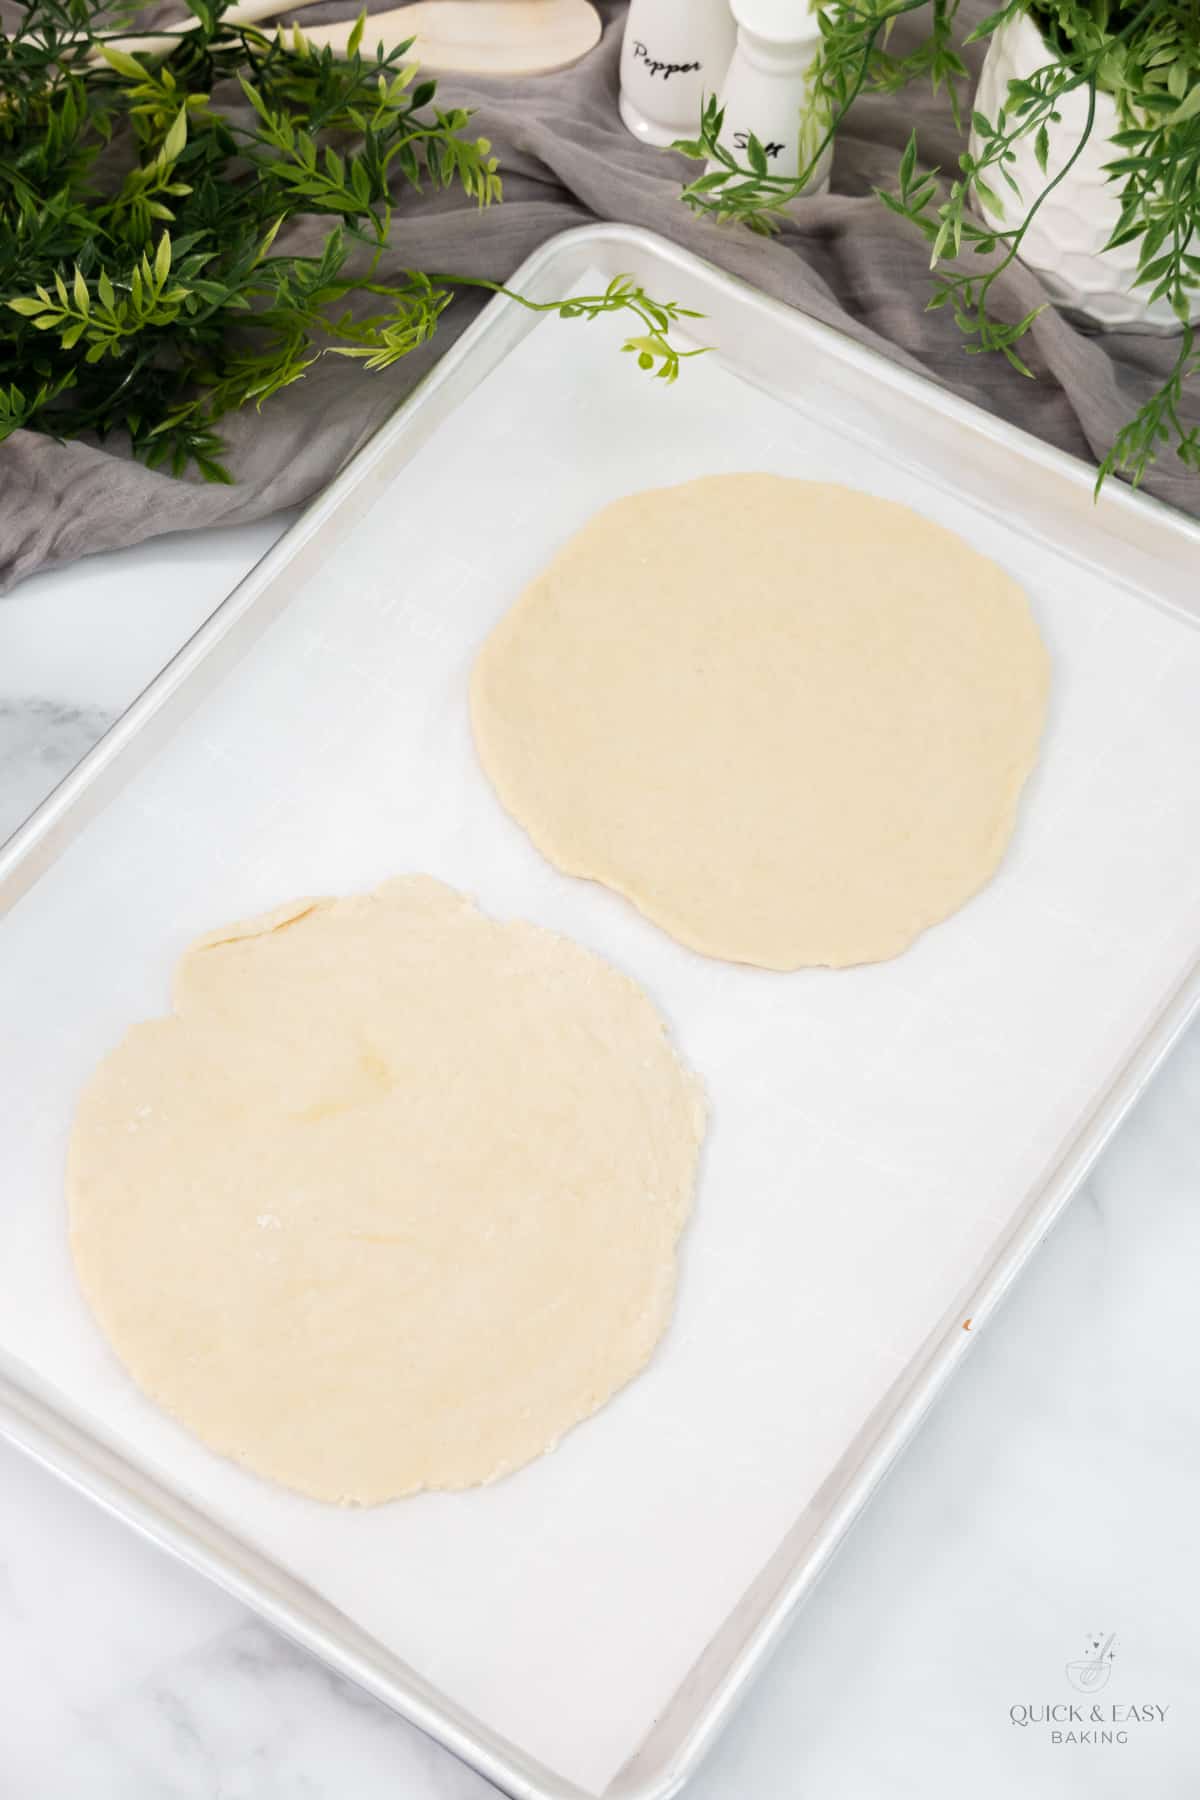 Raw pizza dough in the shape of circles on a baking sheet with parchment paper.